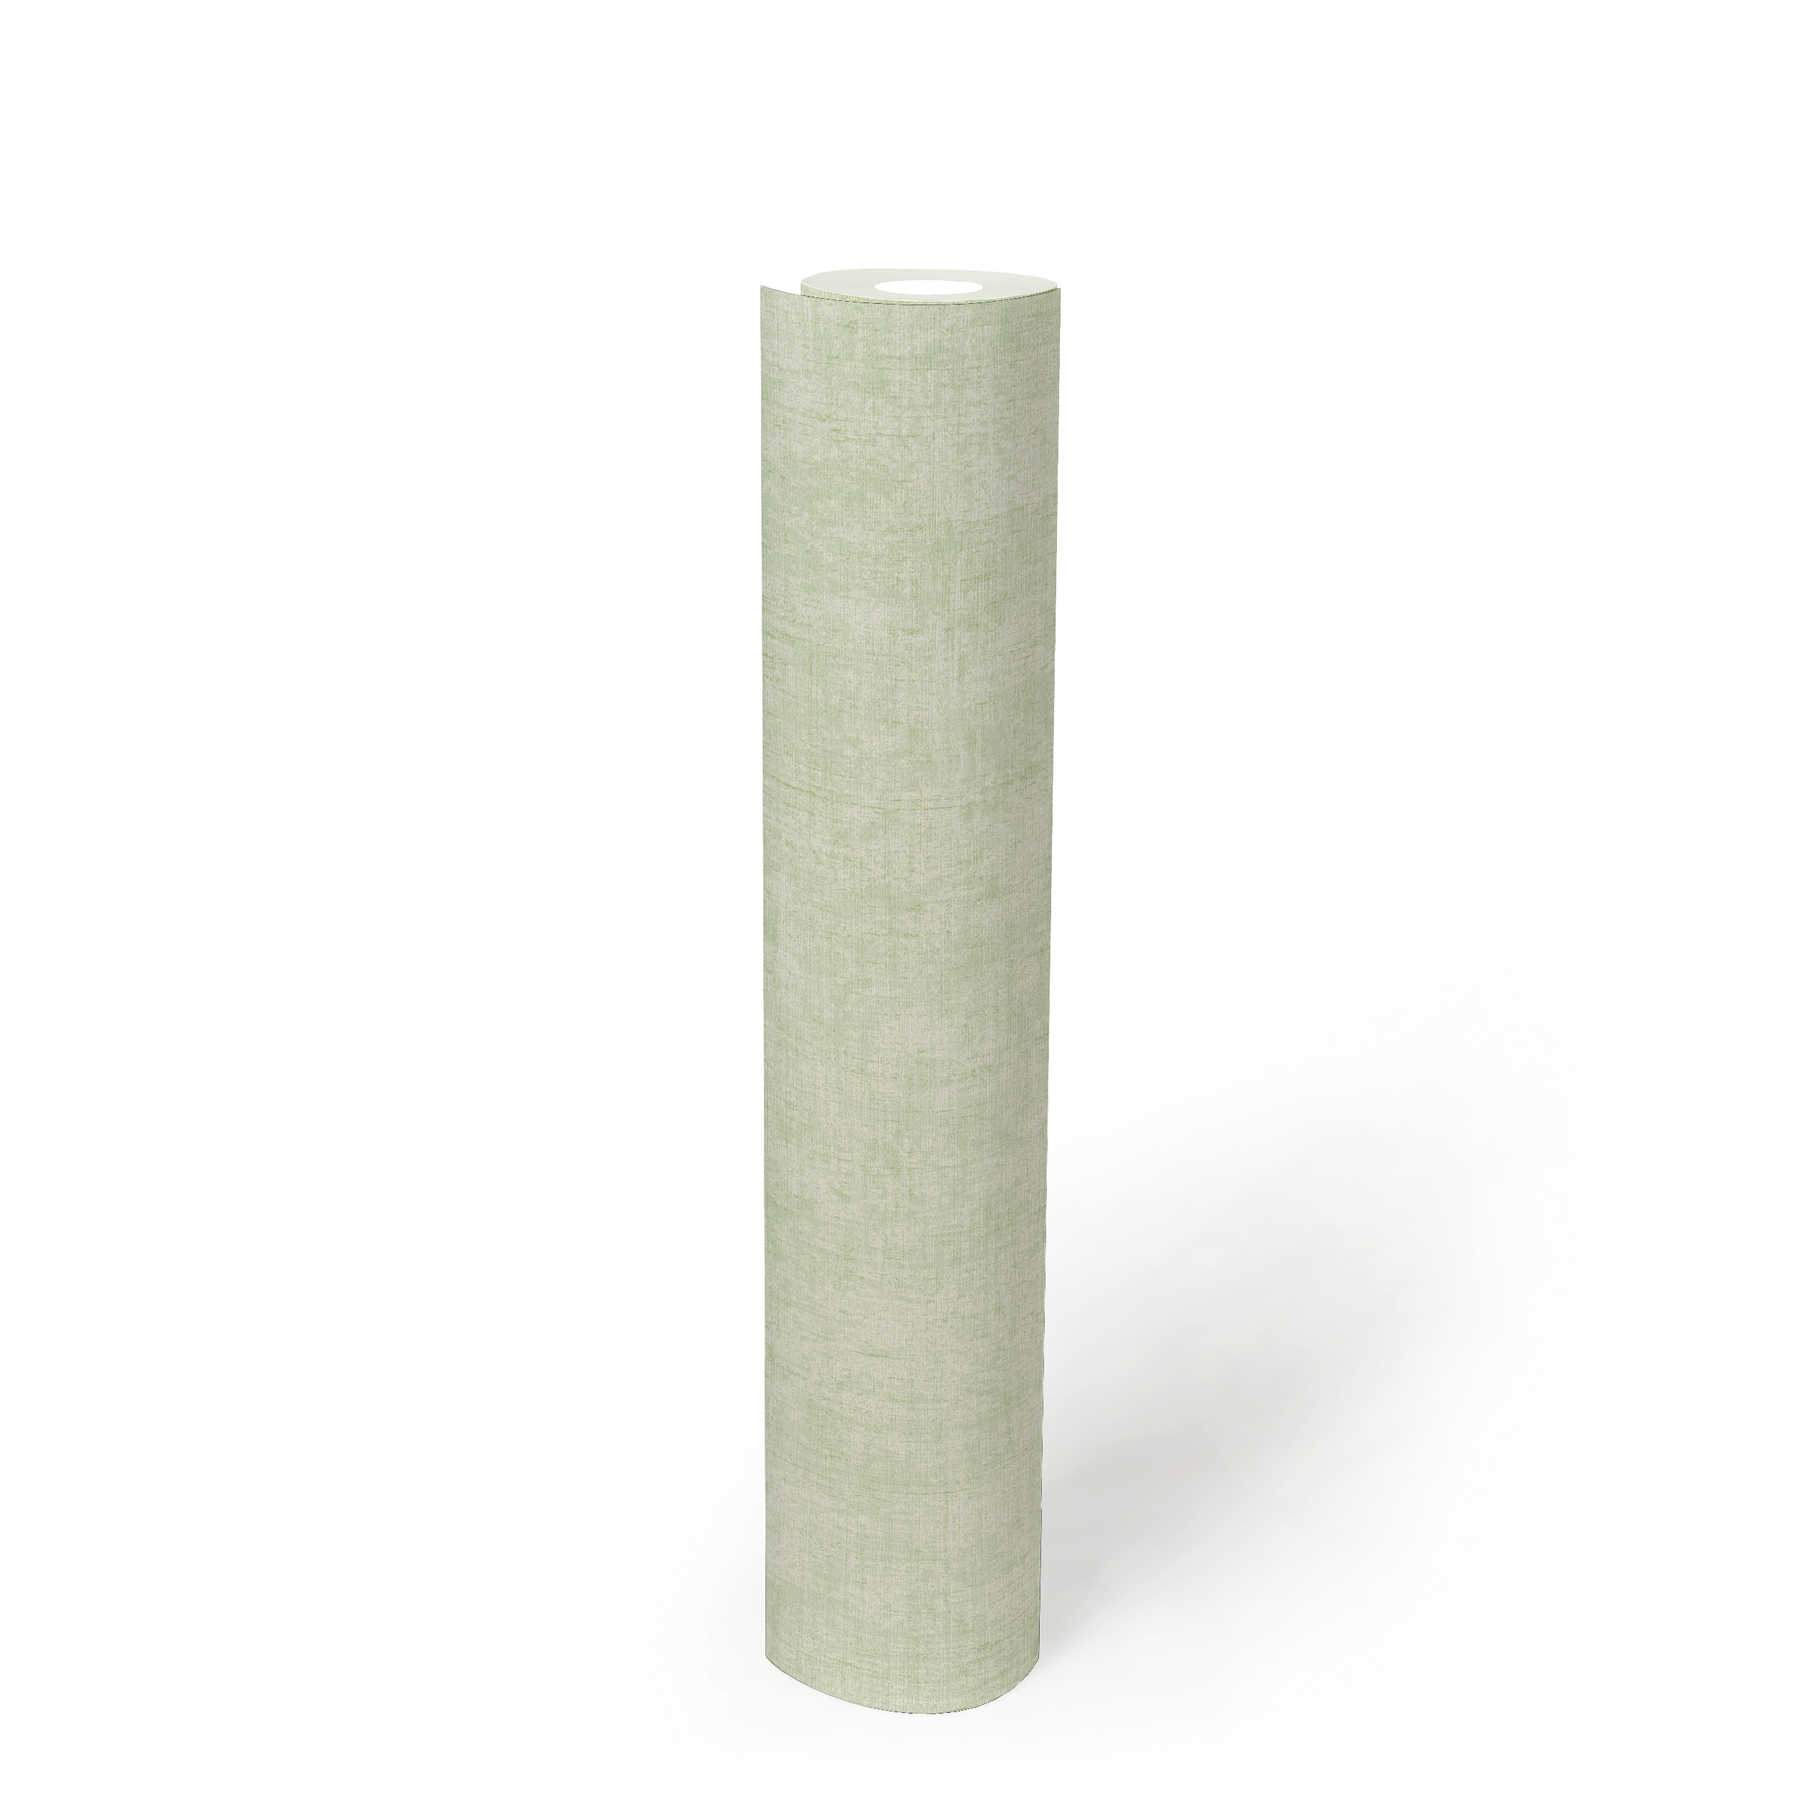             Lime green wallpaper green grey mottled with natural texture
        